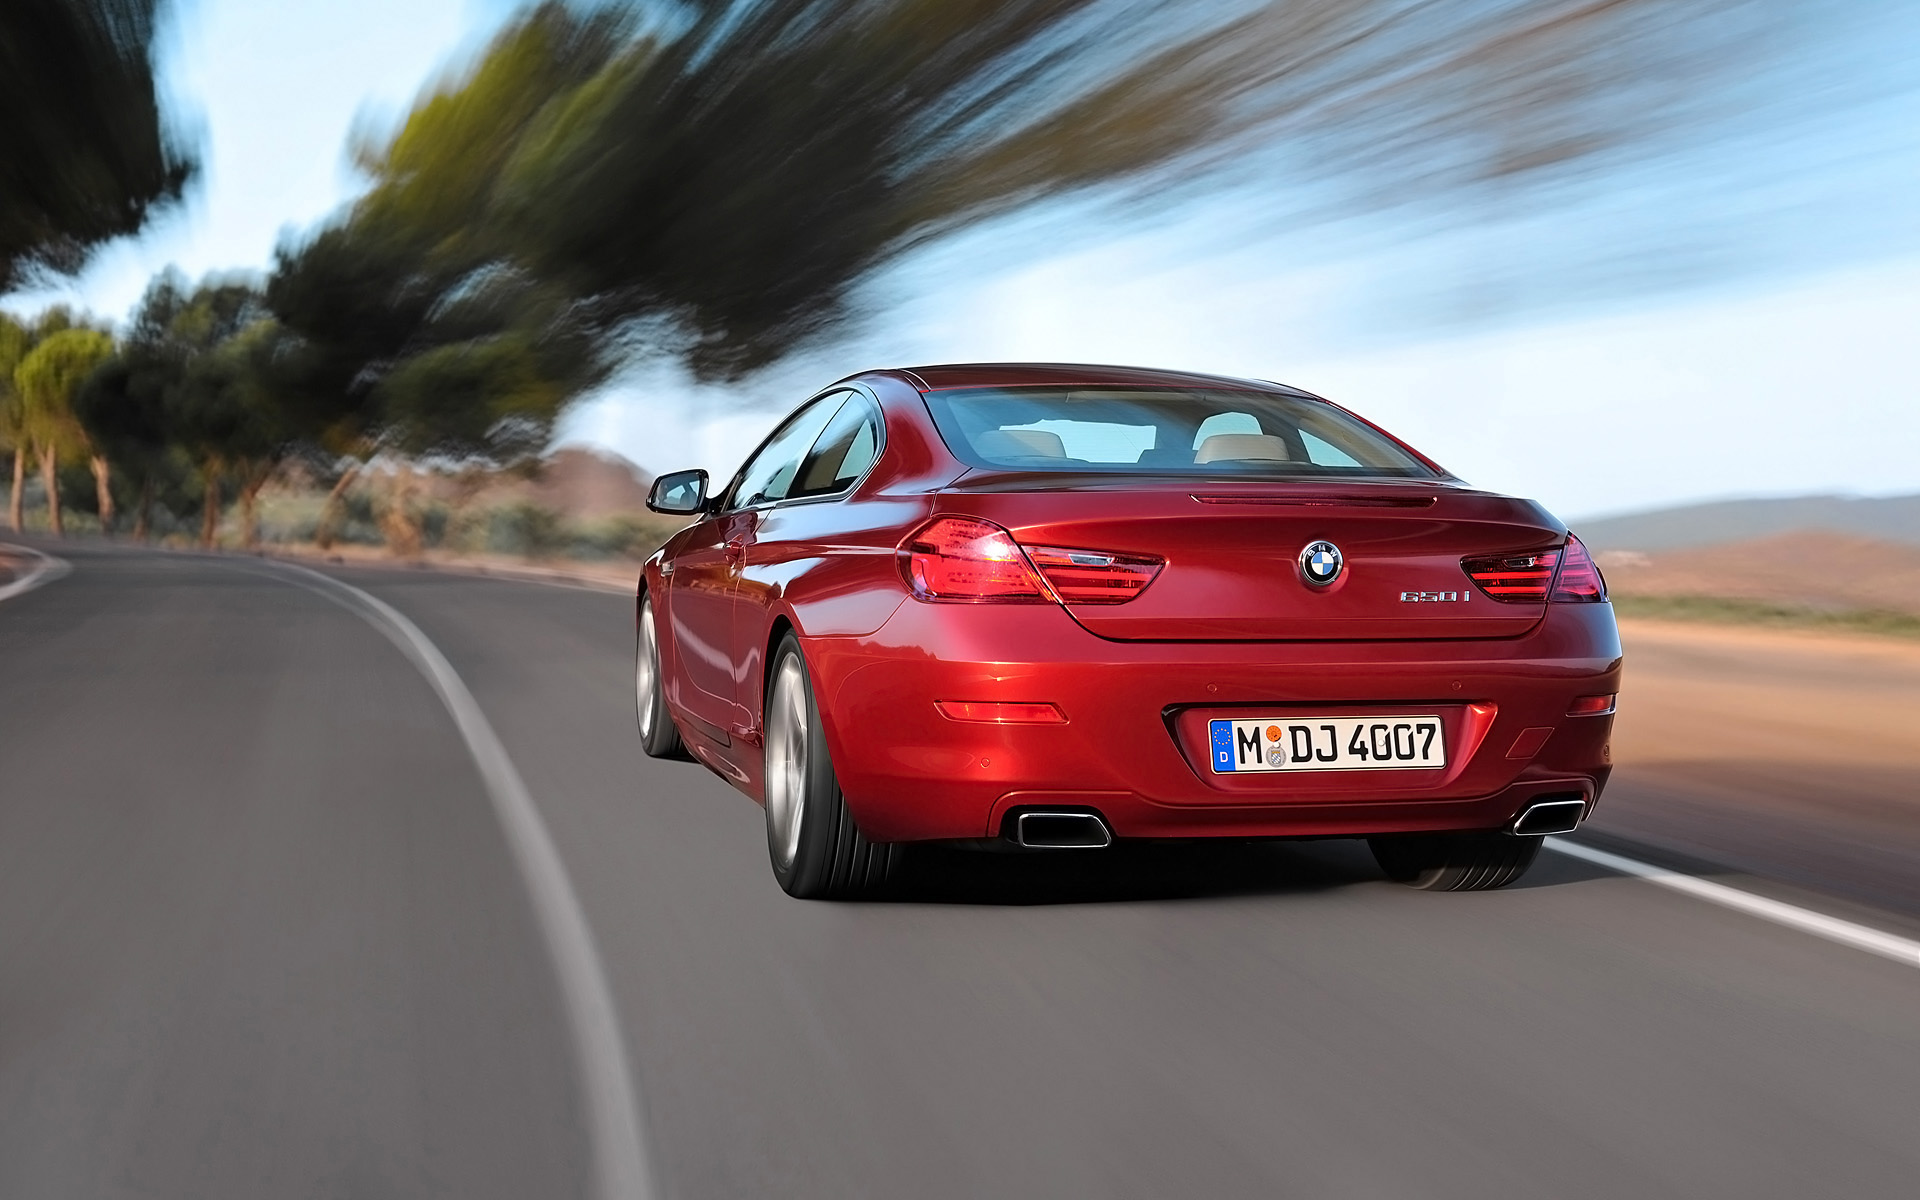  2011 BMW 6-Series Coupe Wallpaper.